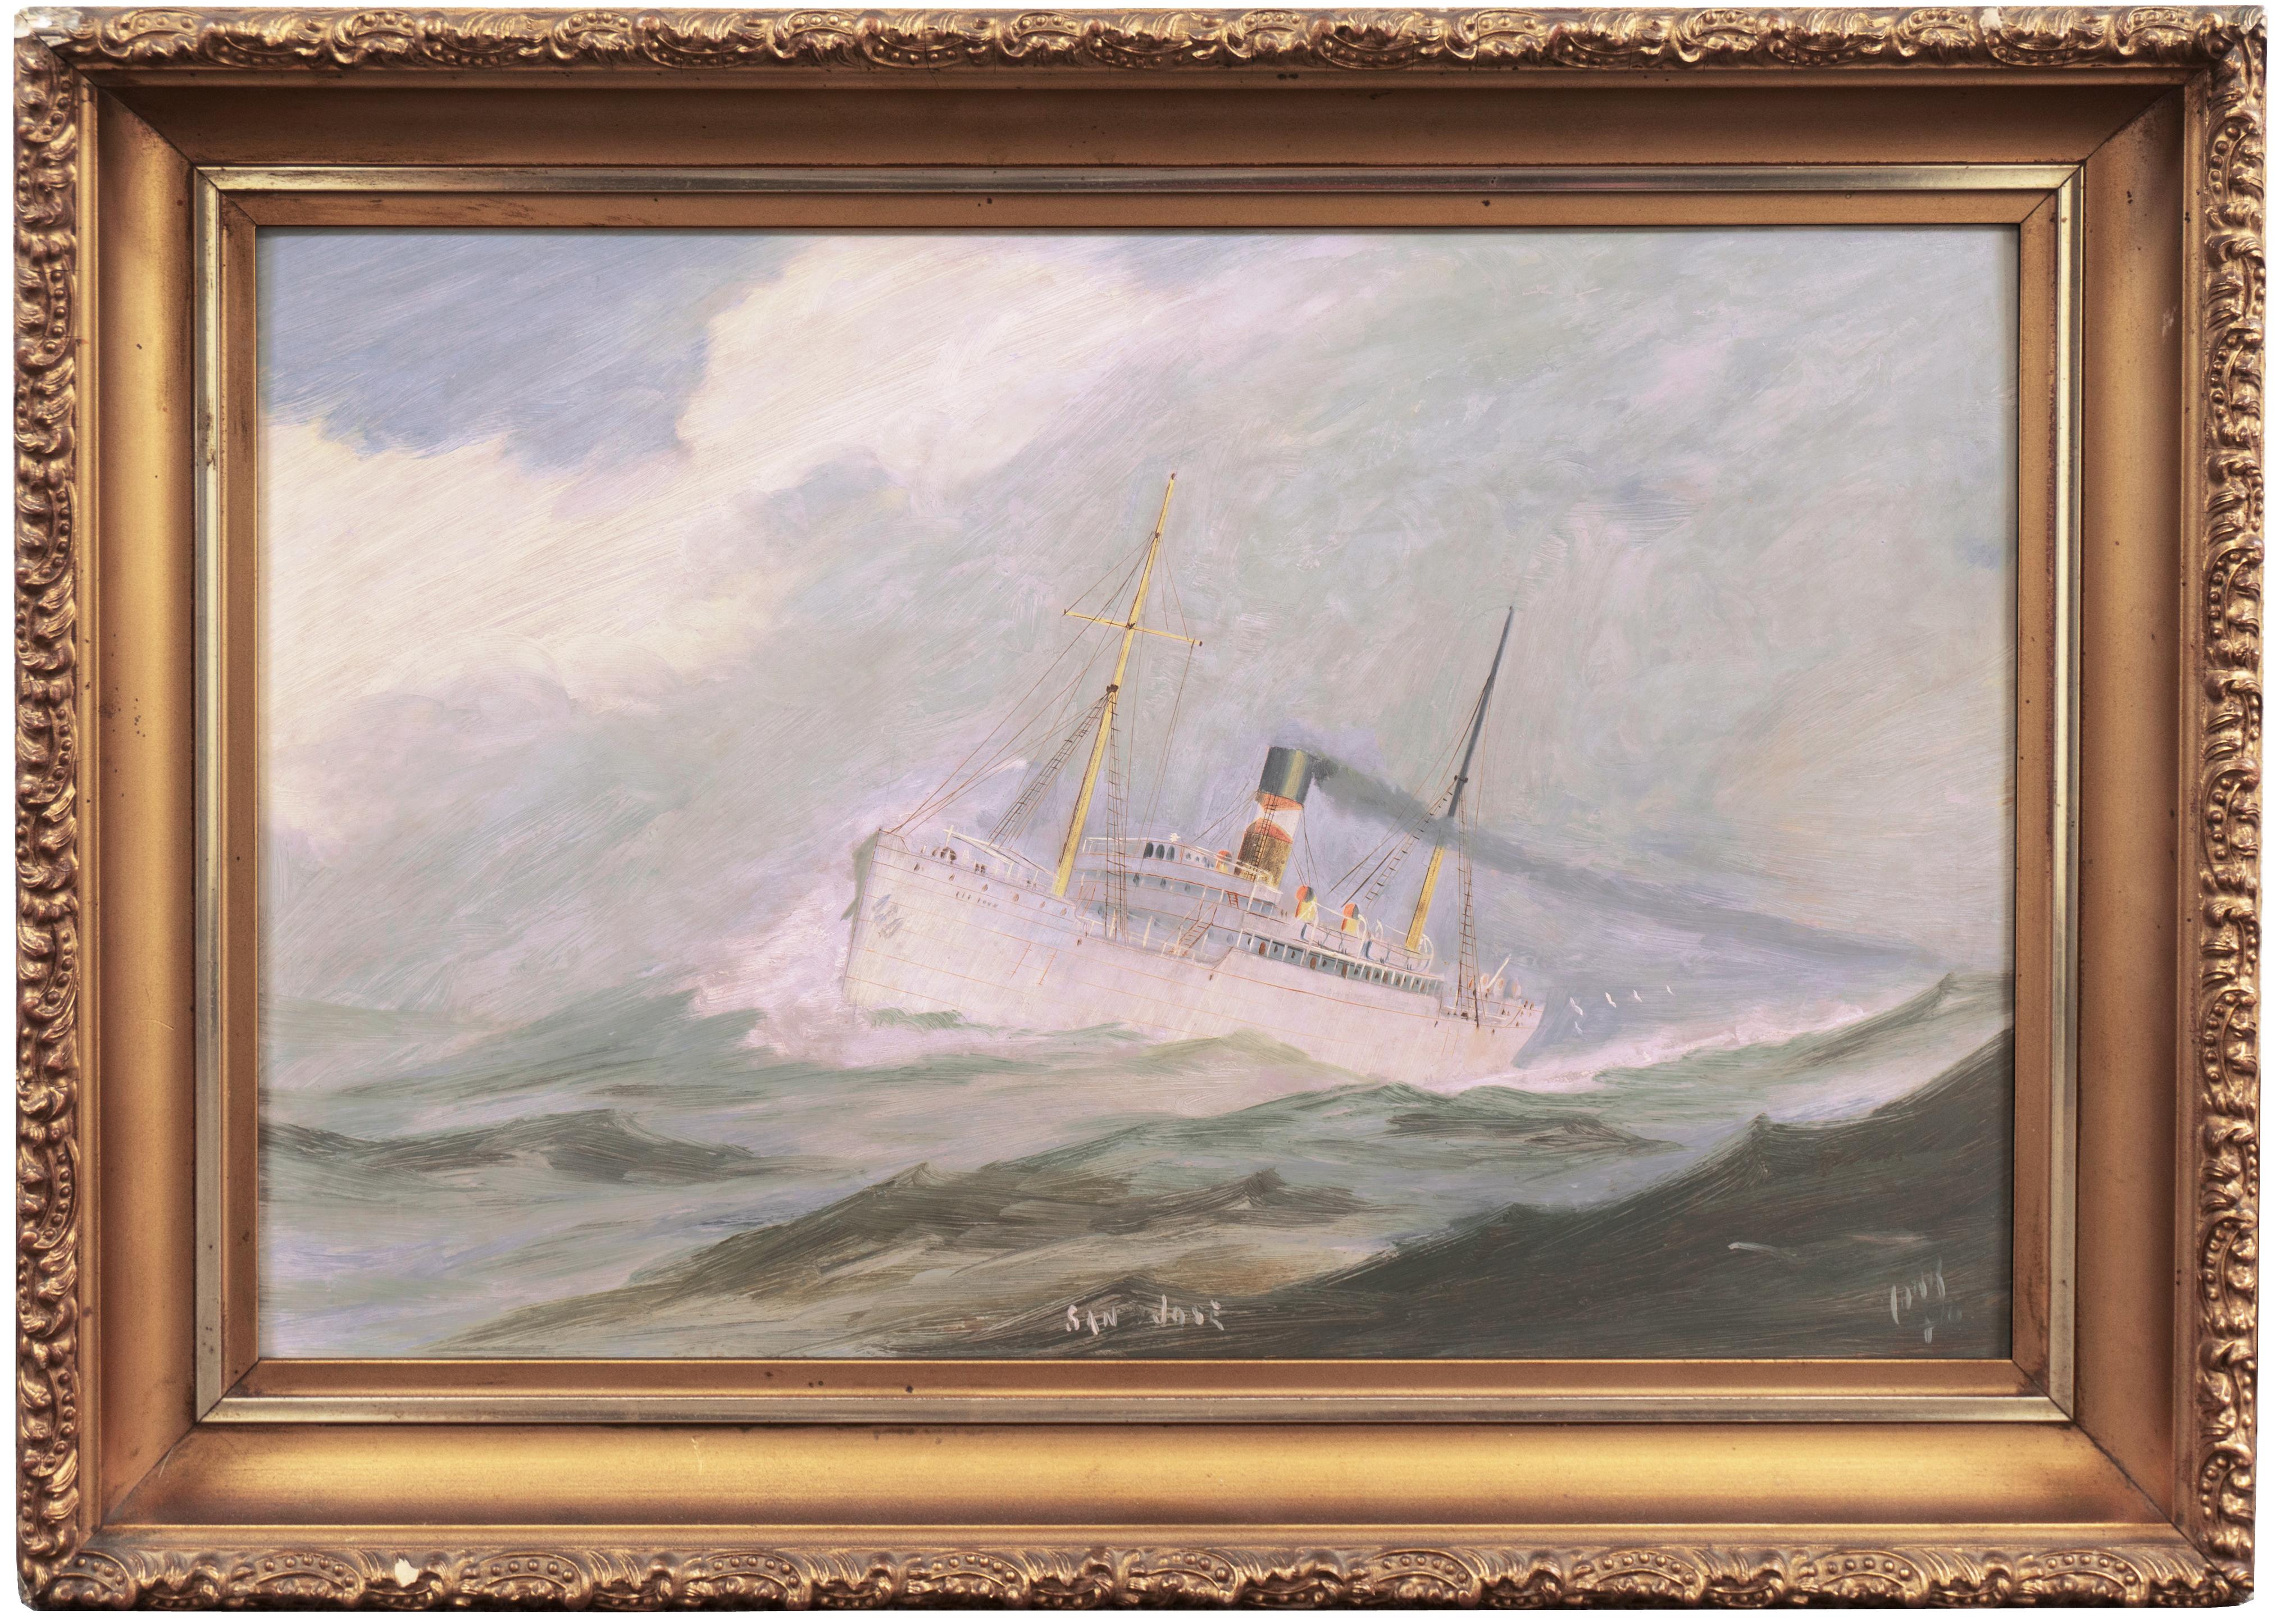 'The SS. San Jose', American Merchant Marine, United Fruit Company Freighter  - Painting by 19th Century American School